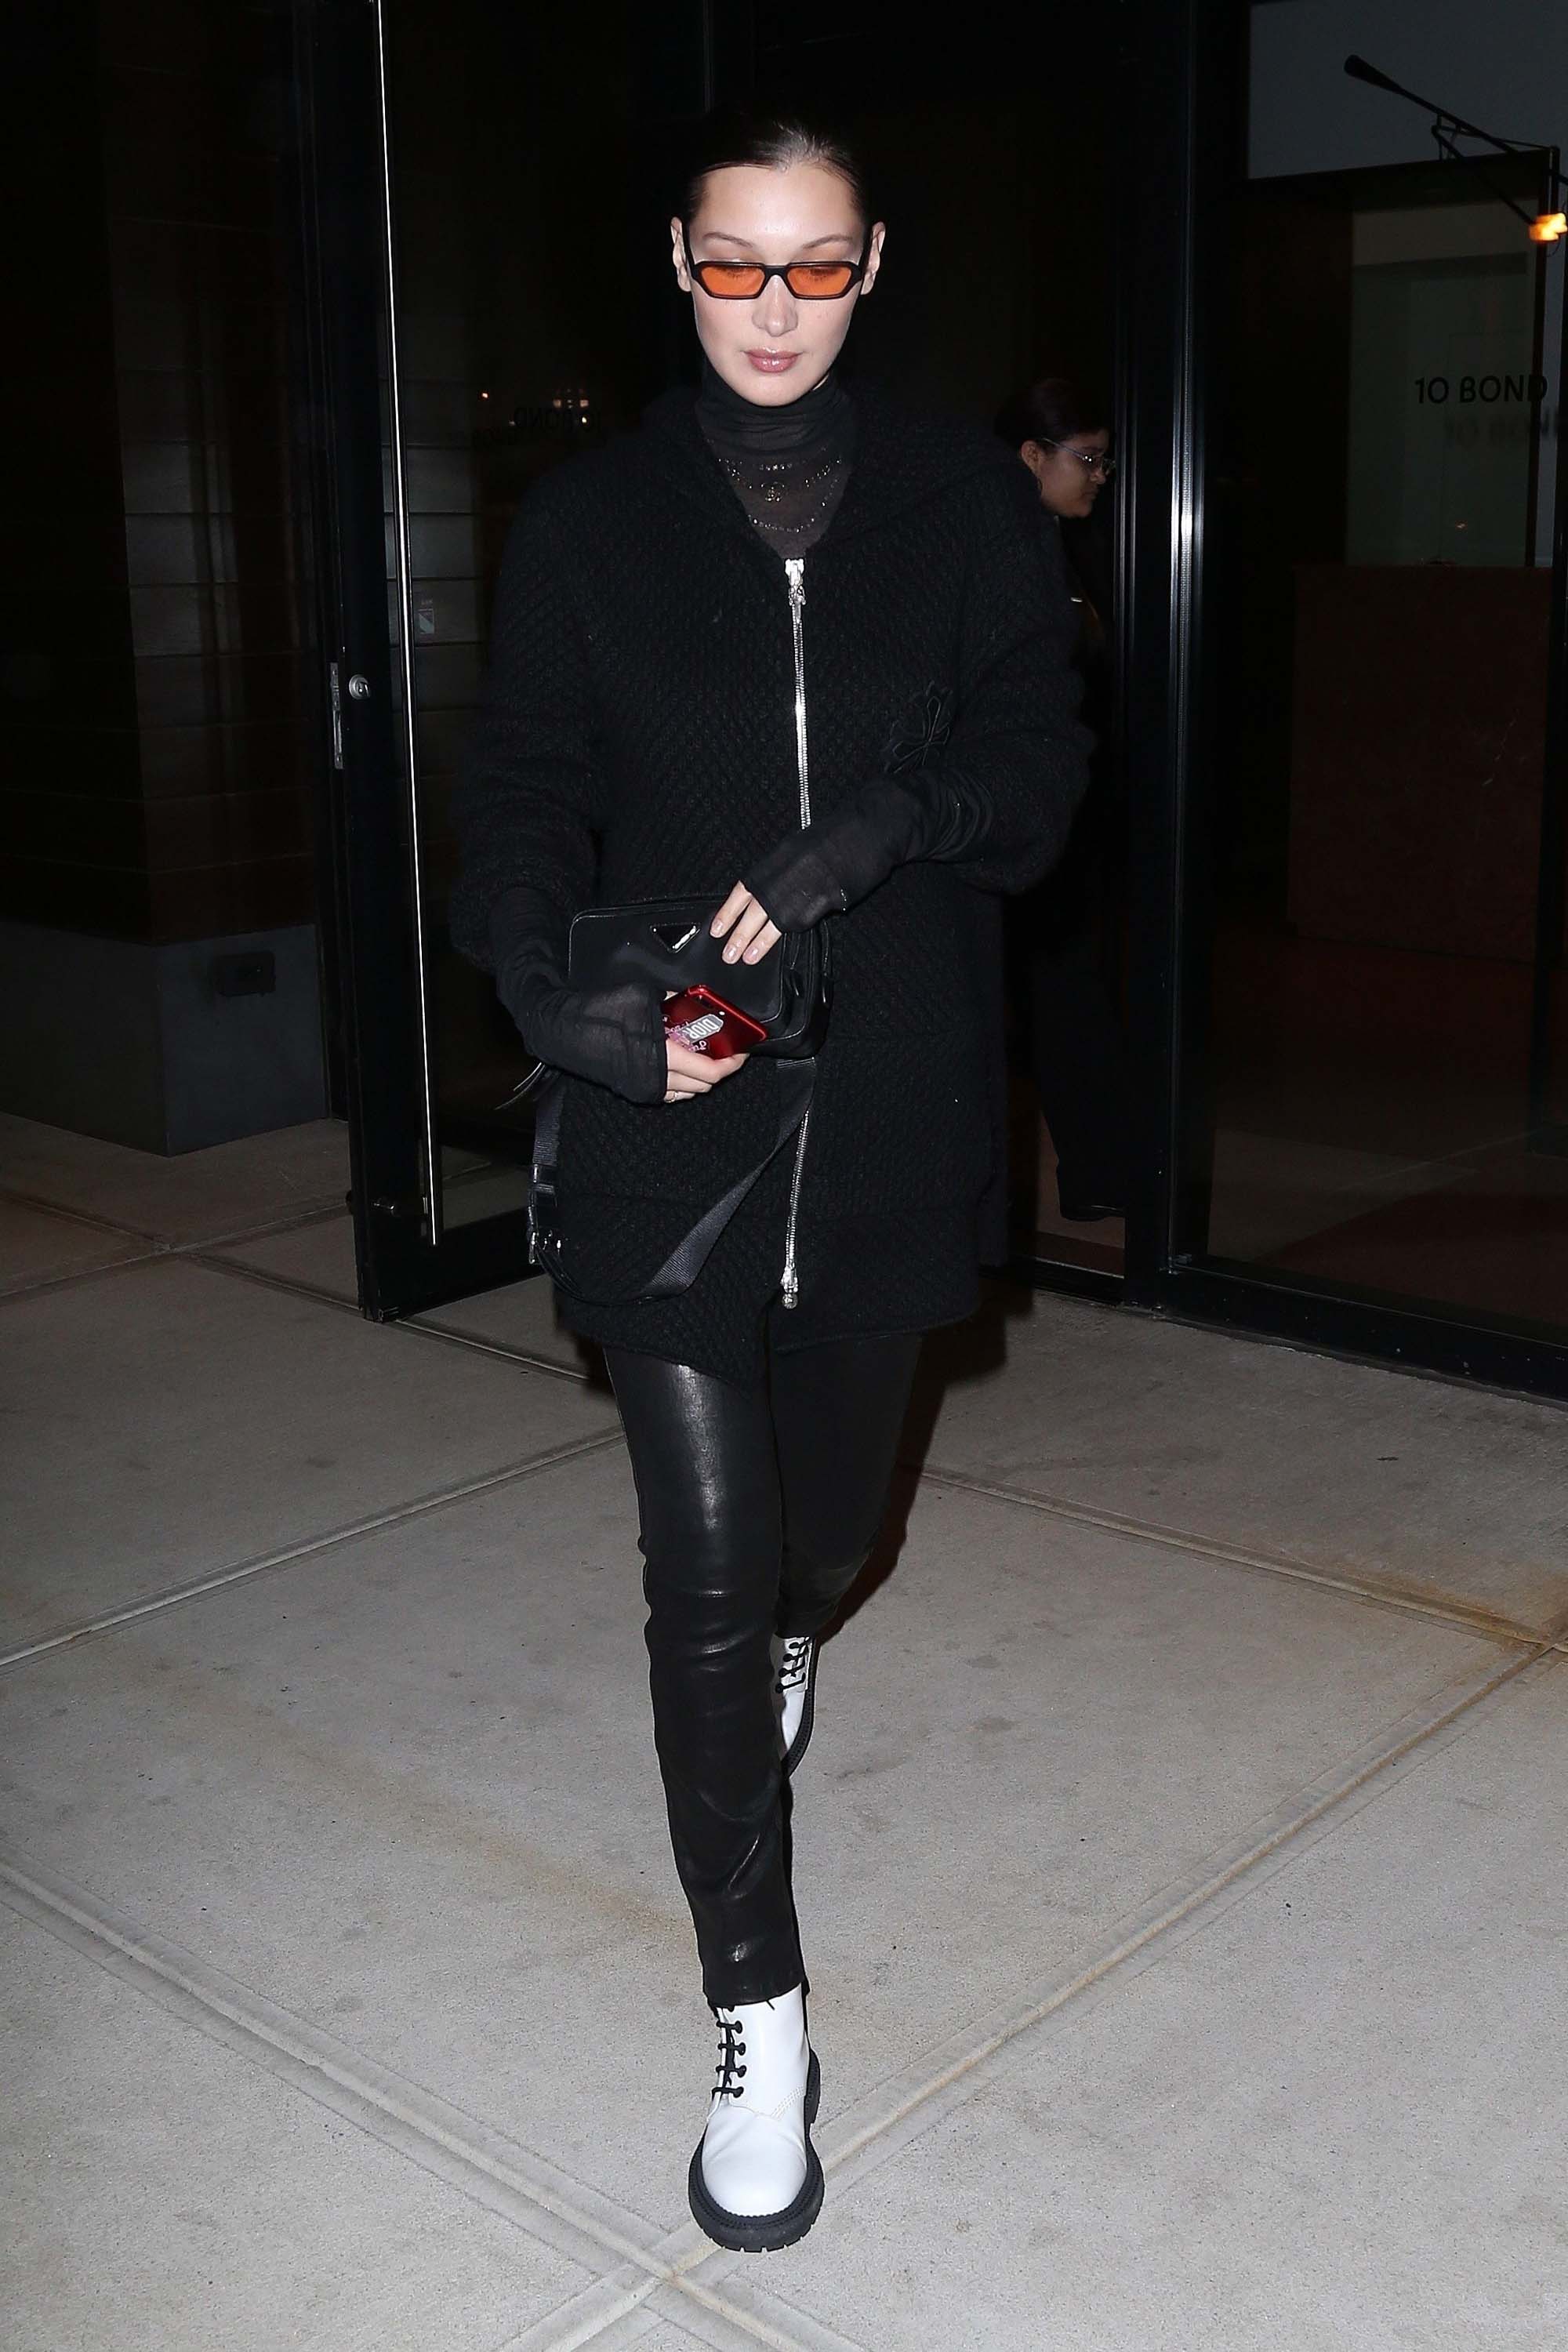 Bella Hadid steps out in NYC